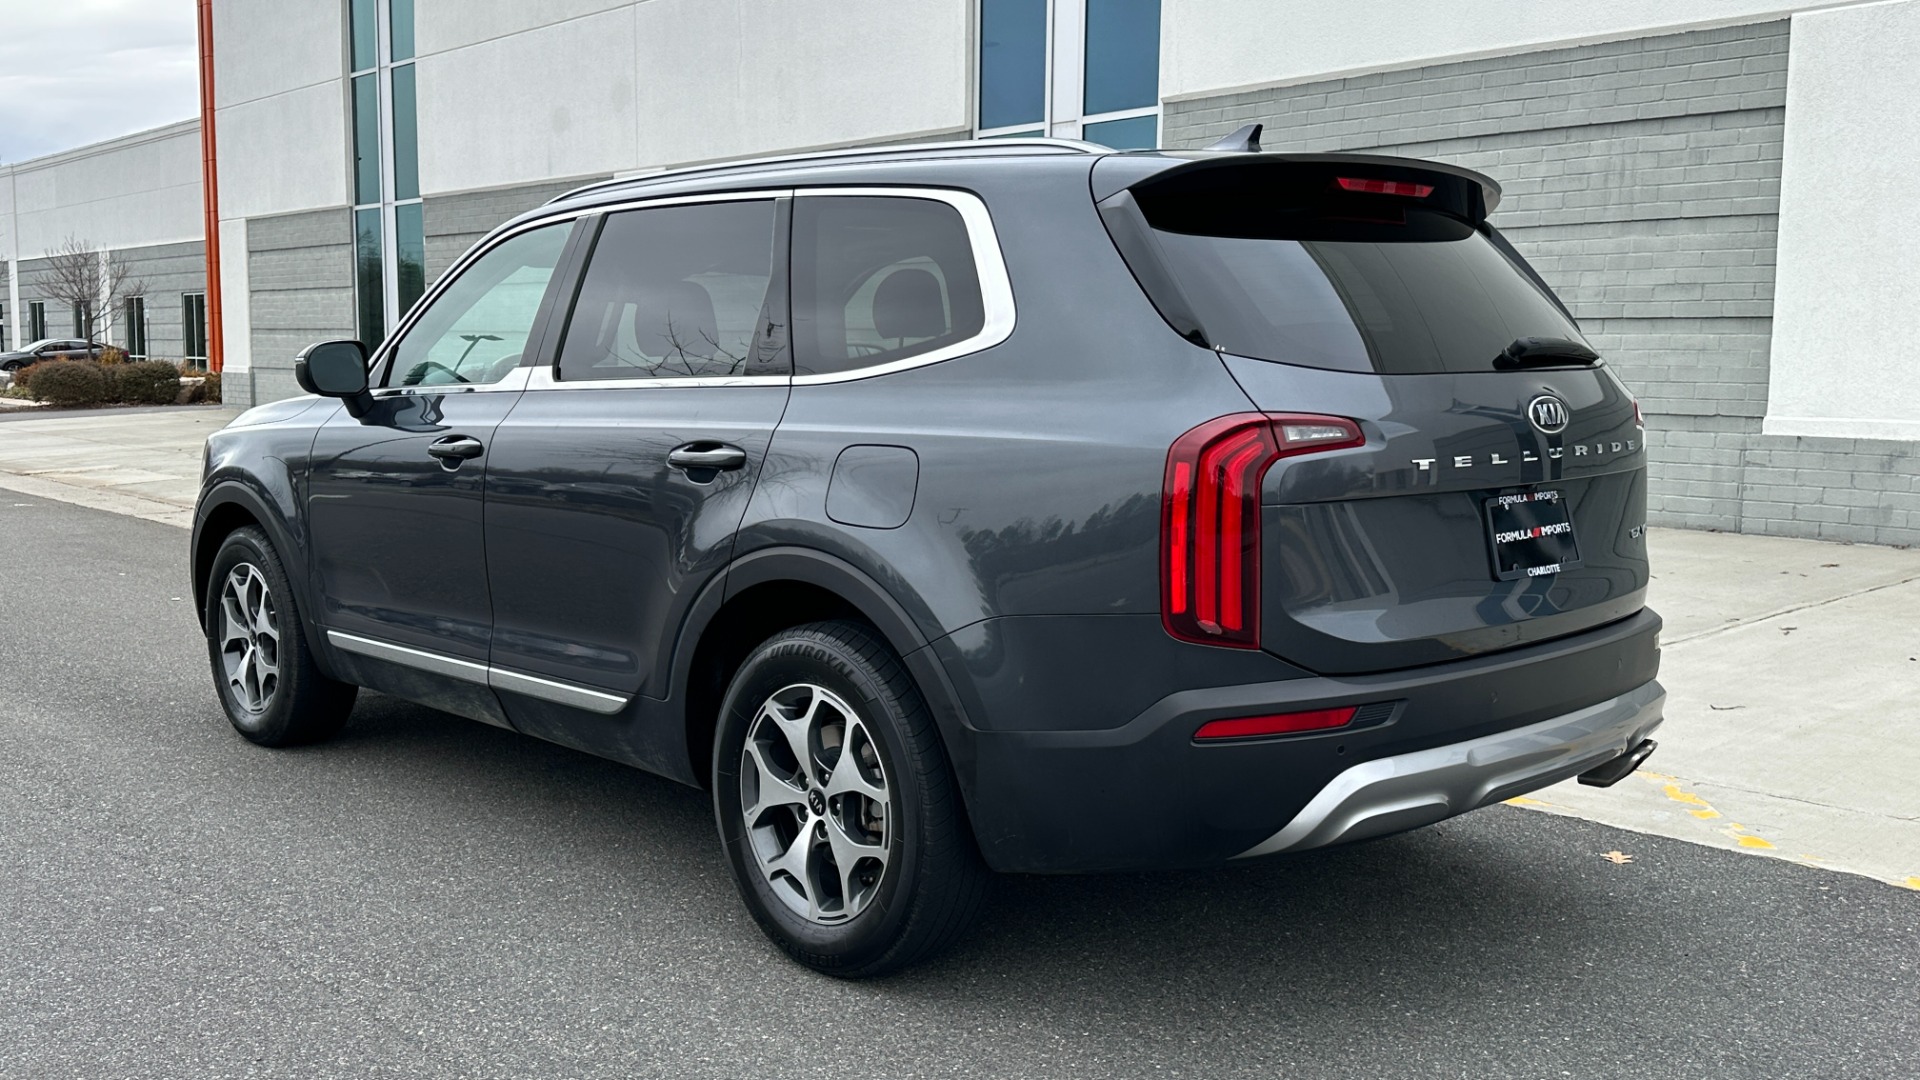 Used 2020 Kia Telluride EX / DRIVER ASSIST / LEATHER / V6 / APPLE CARPLAY / REARVIEW / 3 ROW for sale $31,695 at Formula Imports in Charlotte NC 28227 4